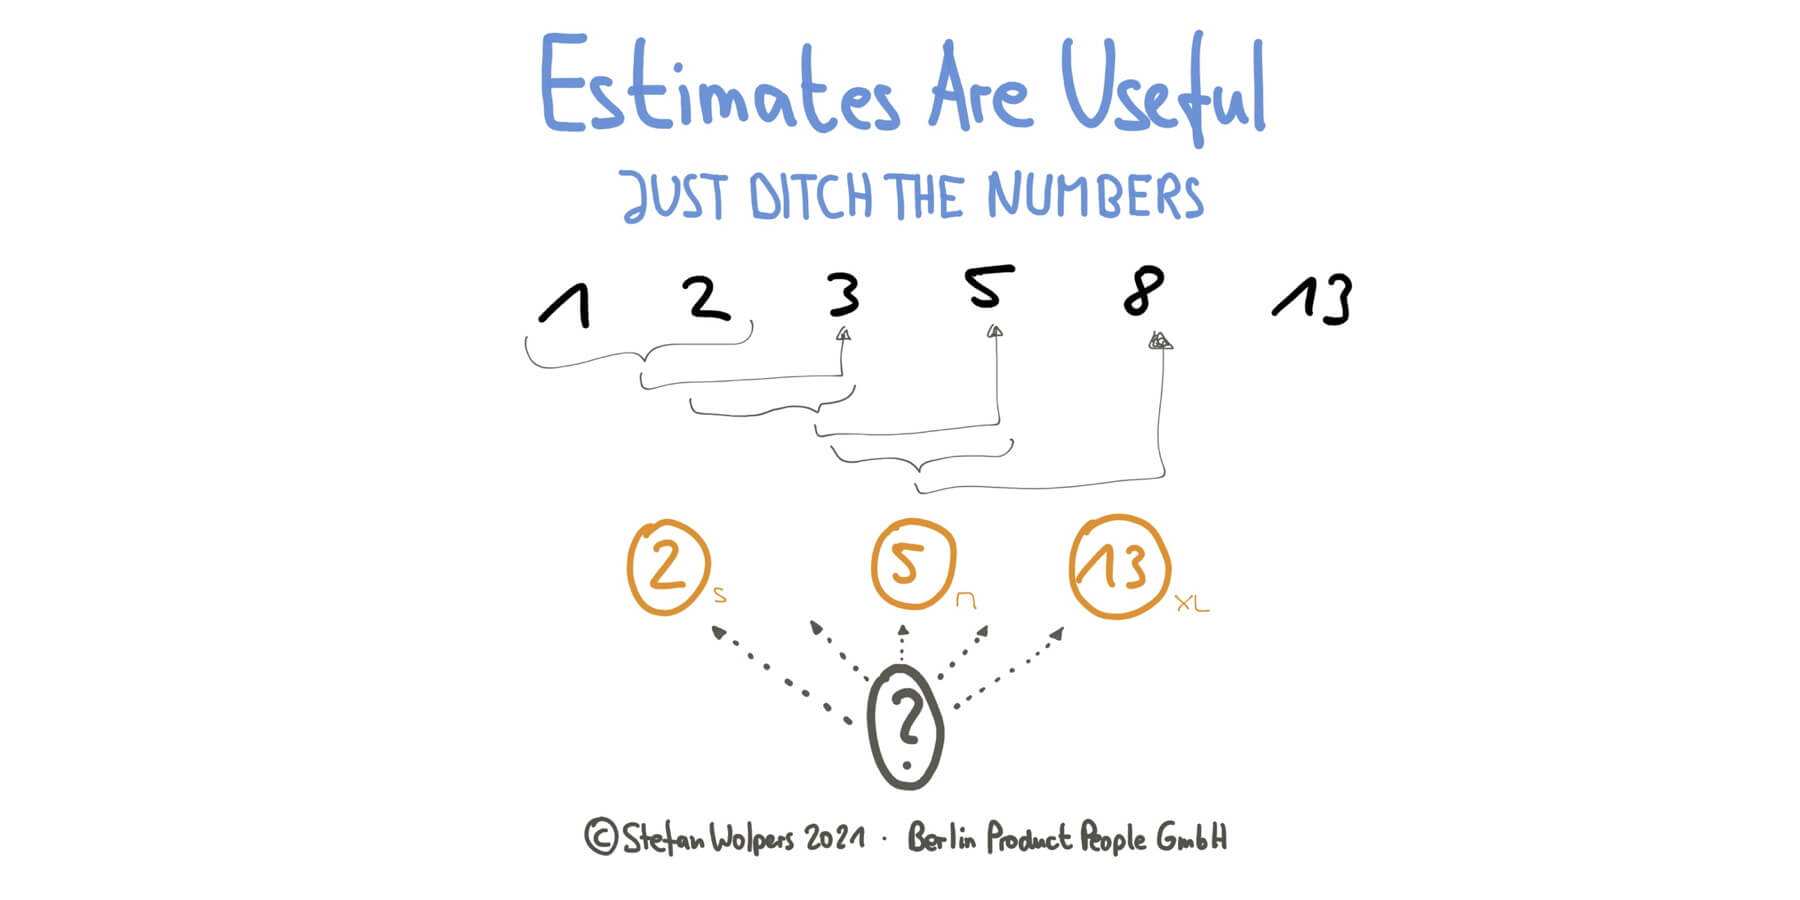 Estimates Are Useful, Just Ditch the Numbers — Berlin Product People GmbH